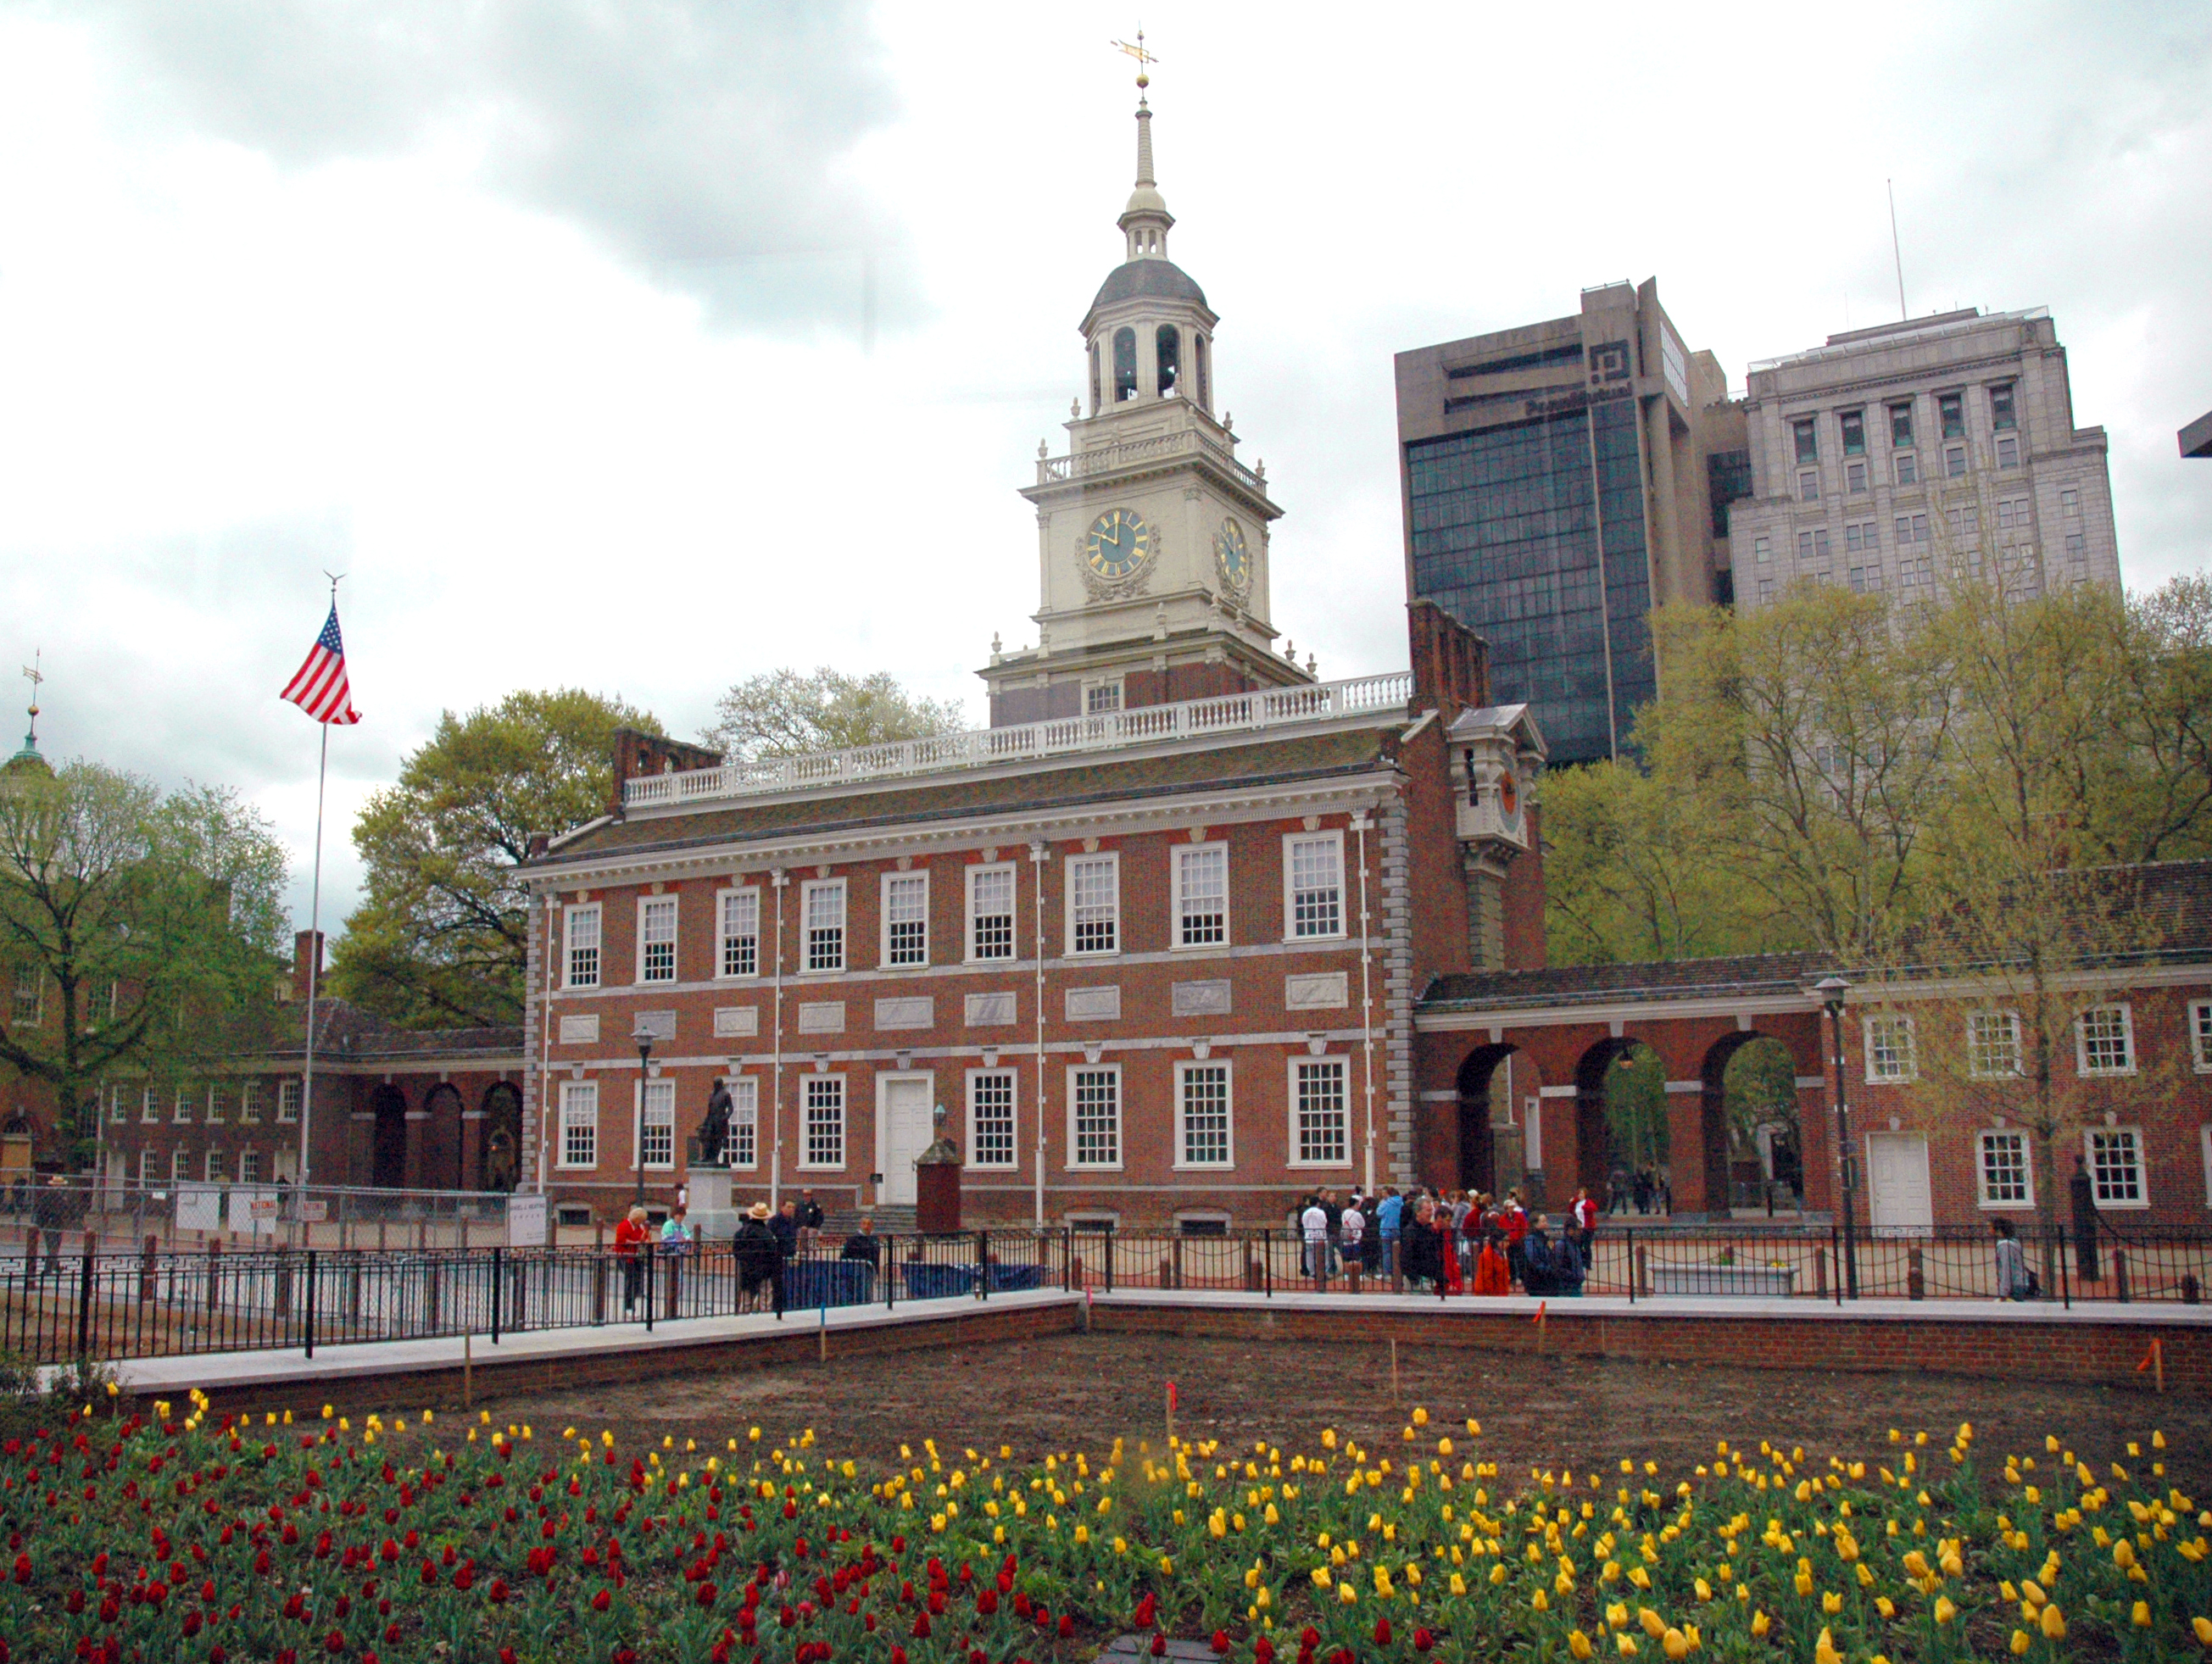 File:Independence Hall.jpg - Wikimedia Commons